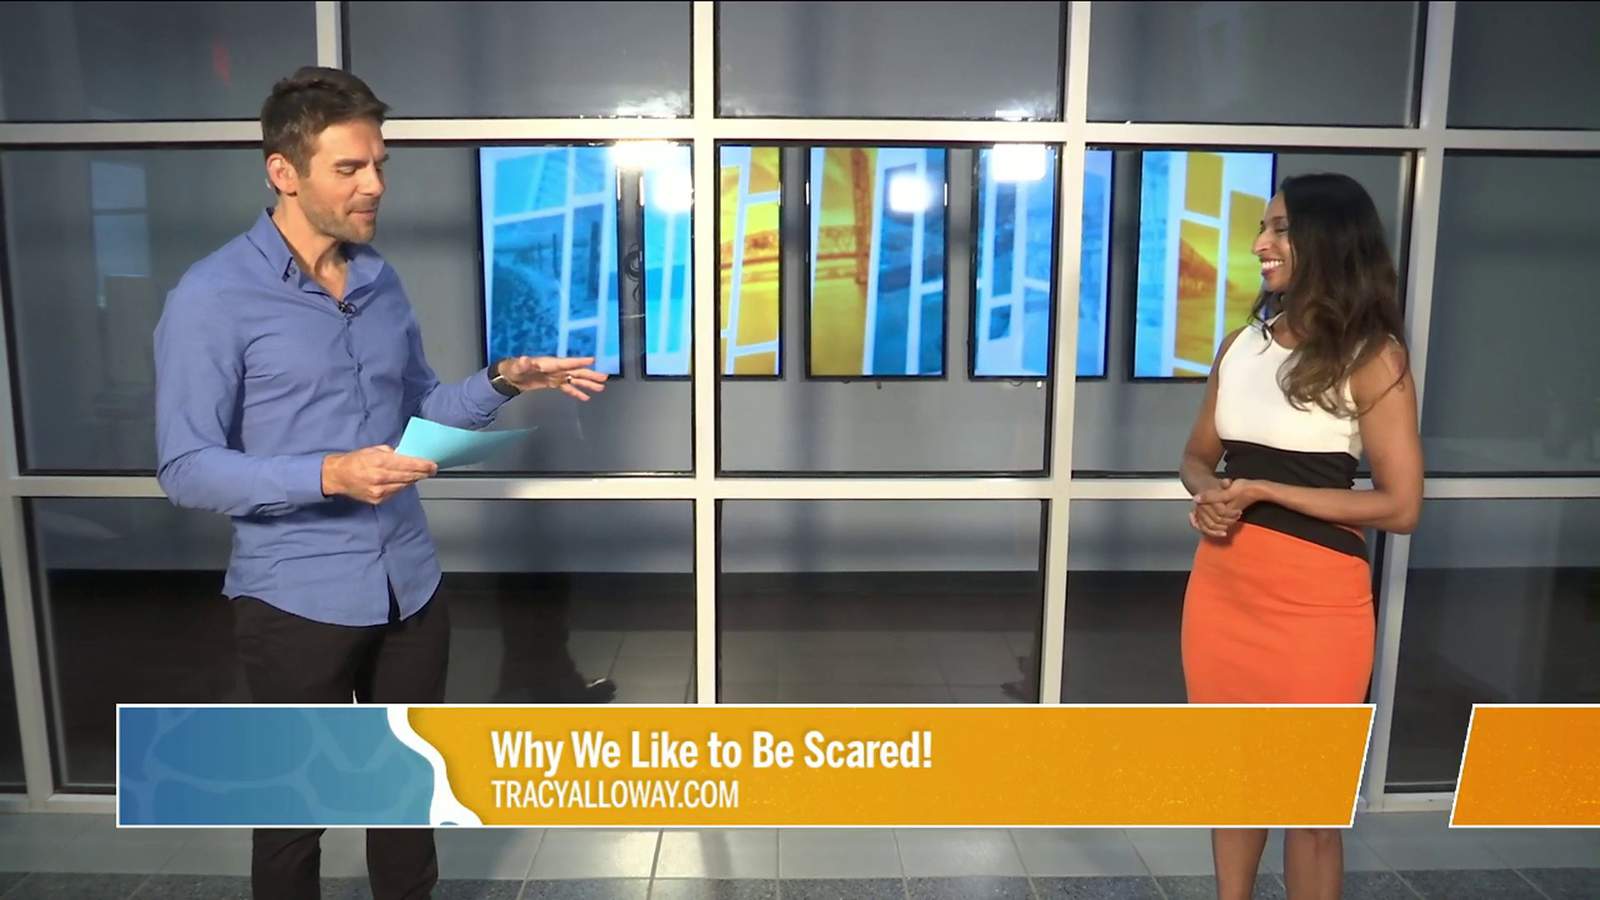 Why do we like being scared? | River City Live